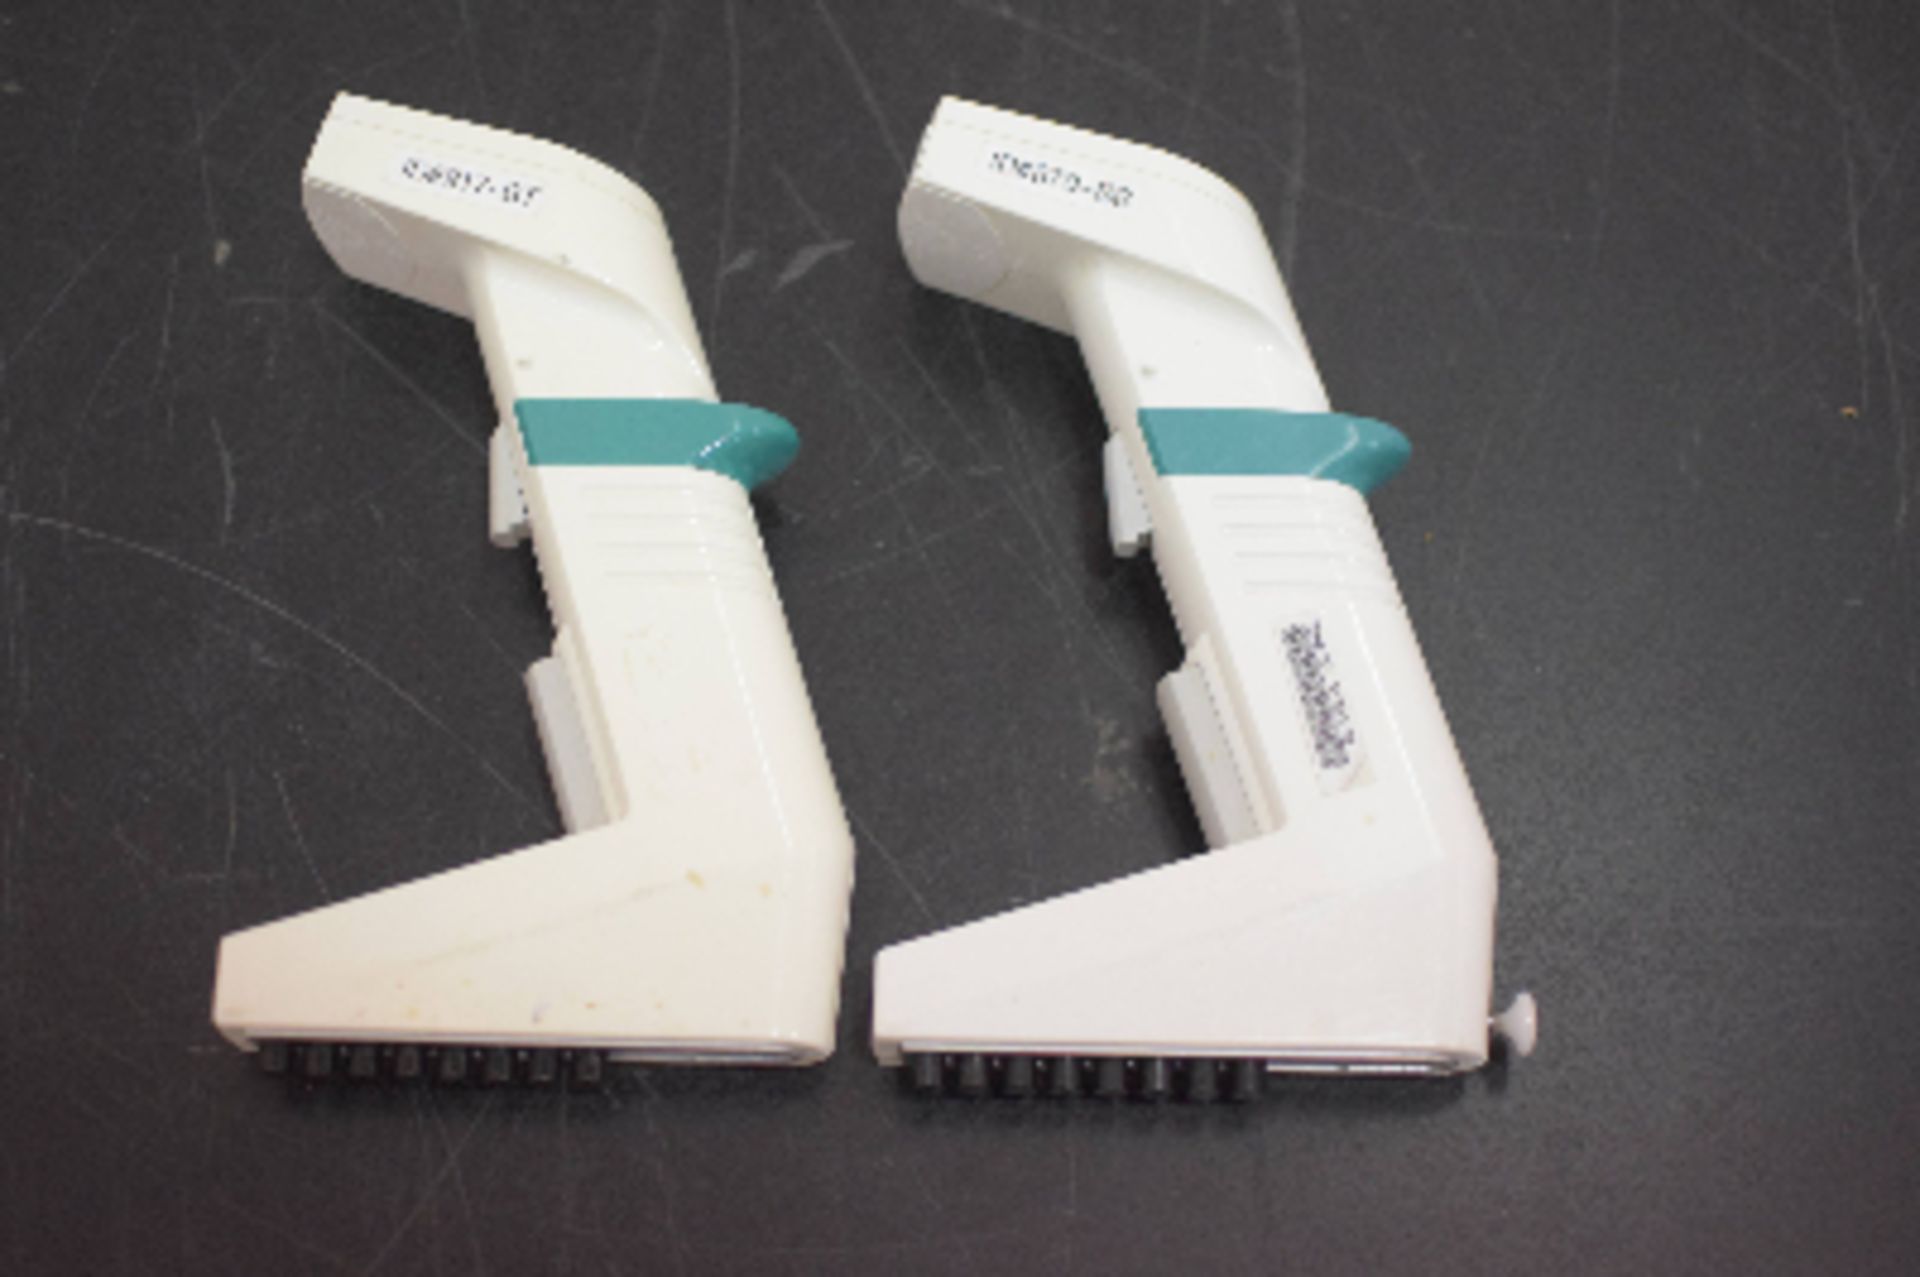 Lot of 2 Matrix Impact 1250uL 8-Channel Pipettes - Image 2 of 2